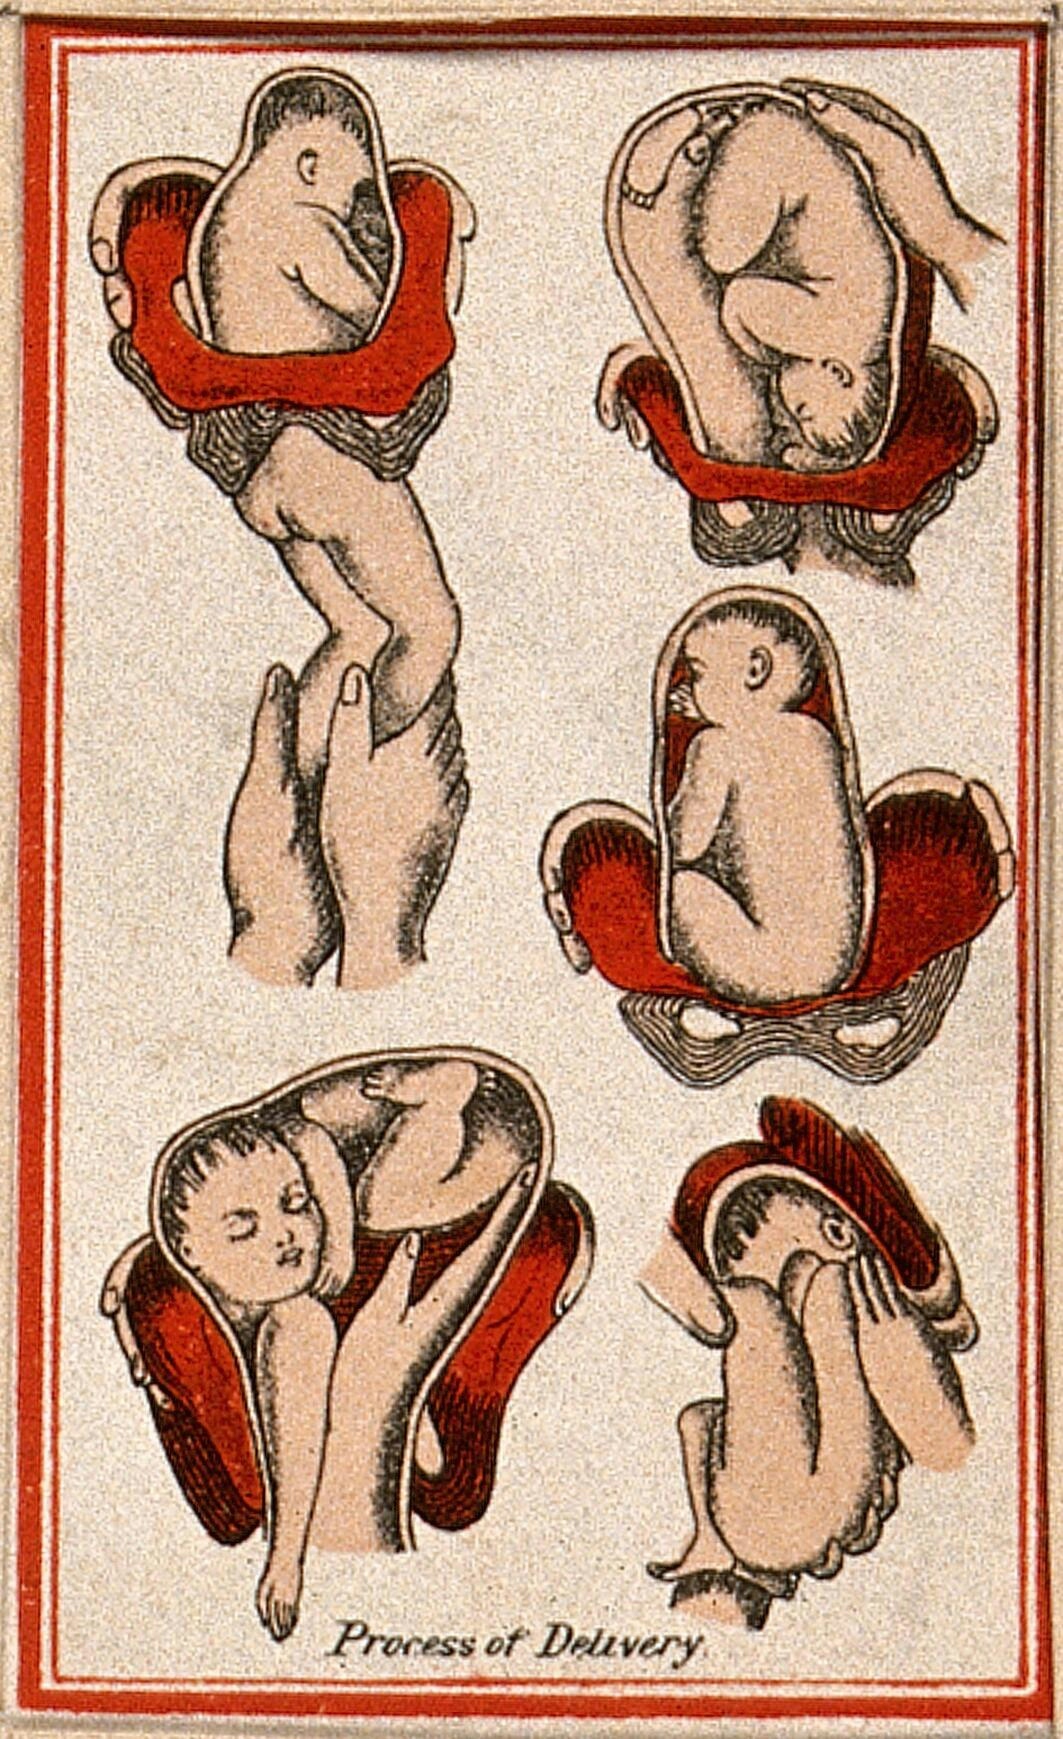 Colour lithograph showing five different stages of a baby being delivered out of the womb. A small line of text at the bottom reads 'Process of delivery'. In four of the five lithographs a hand or hands are assisting with the delivery of the baby, for example by guiding its legs. 